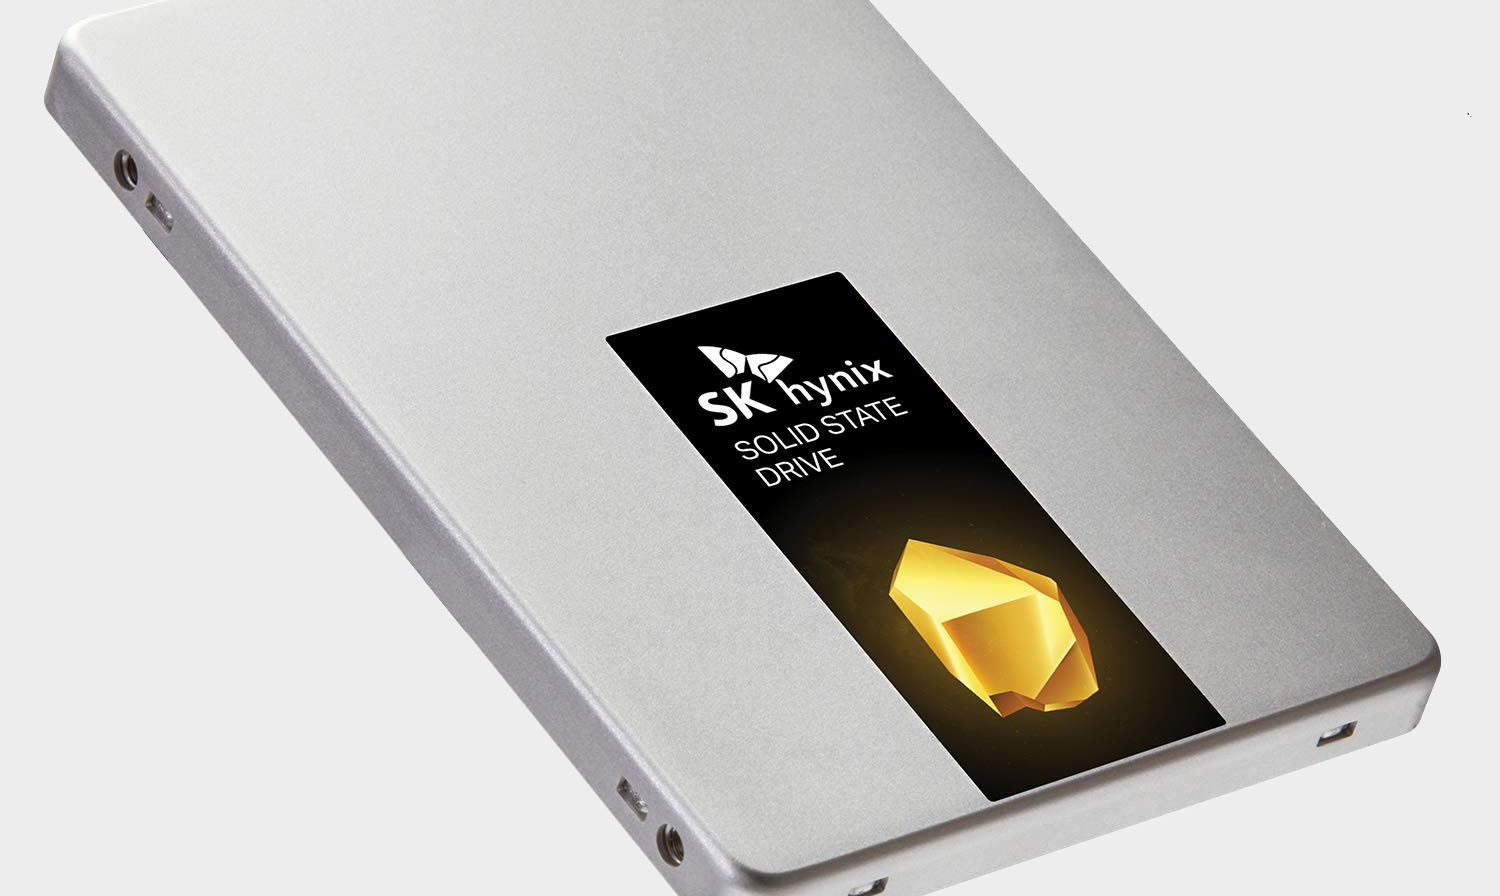 Memory Giant Sk Hynix Is Making Another Run At Consumer Ssds Pc